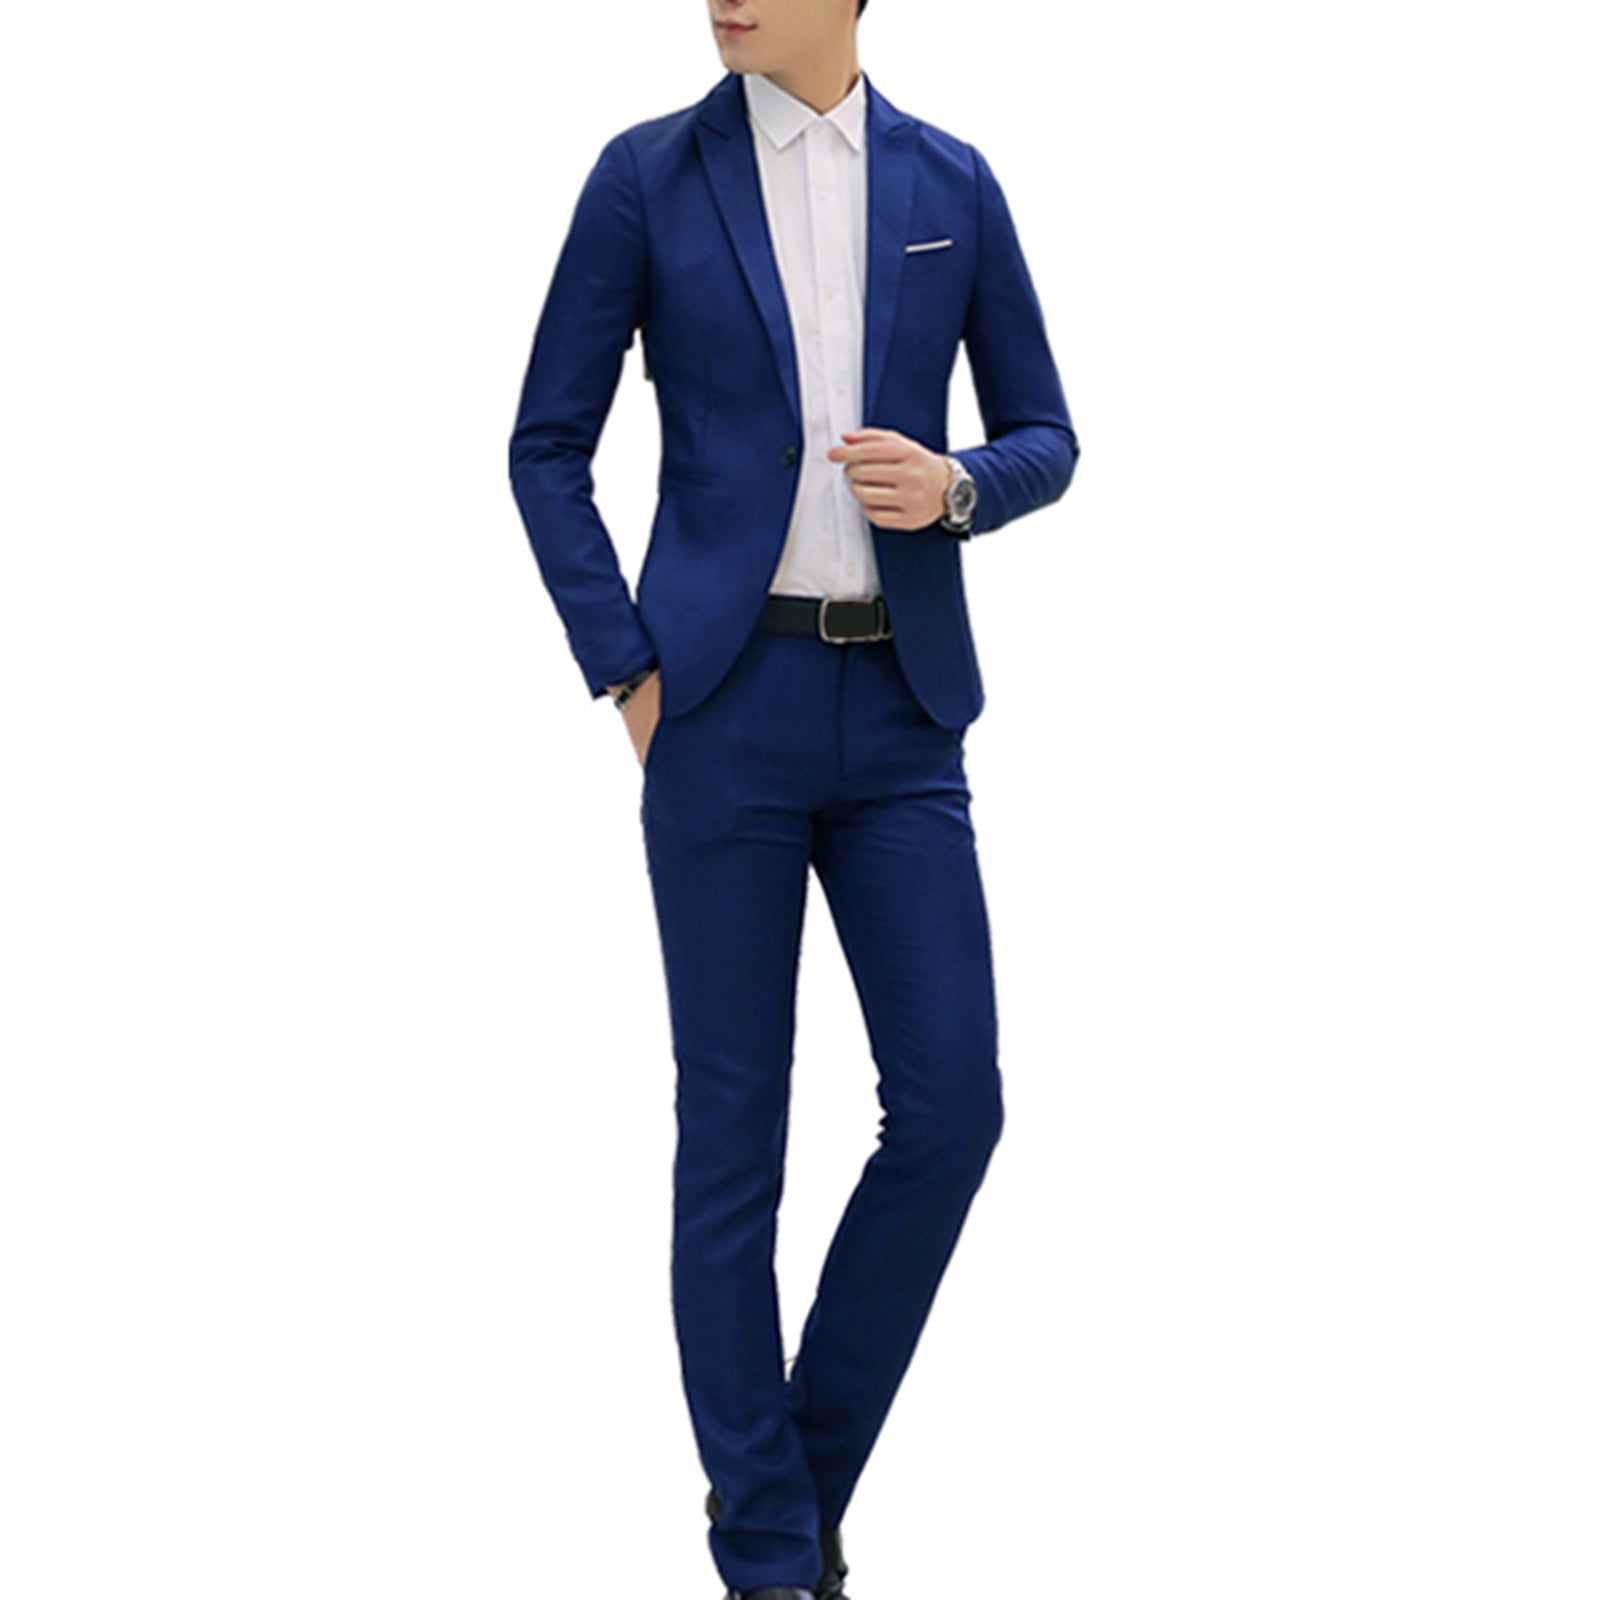 Generic 3 In 1 HIGH QUALITY Suit Trousers- Navy Blue, Black And Grey